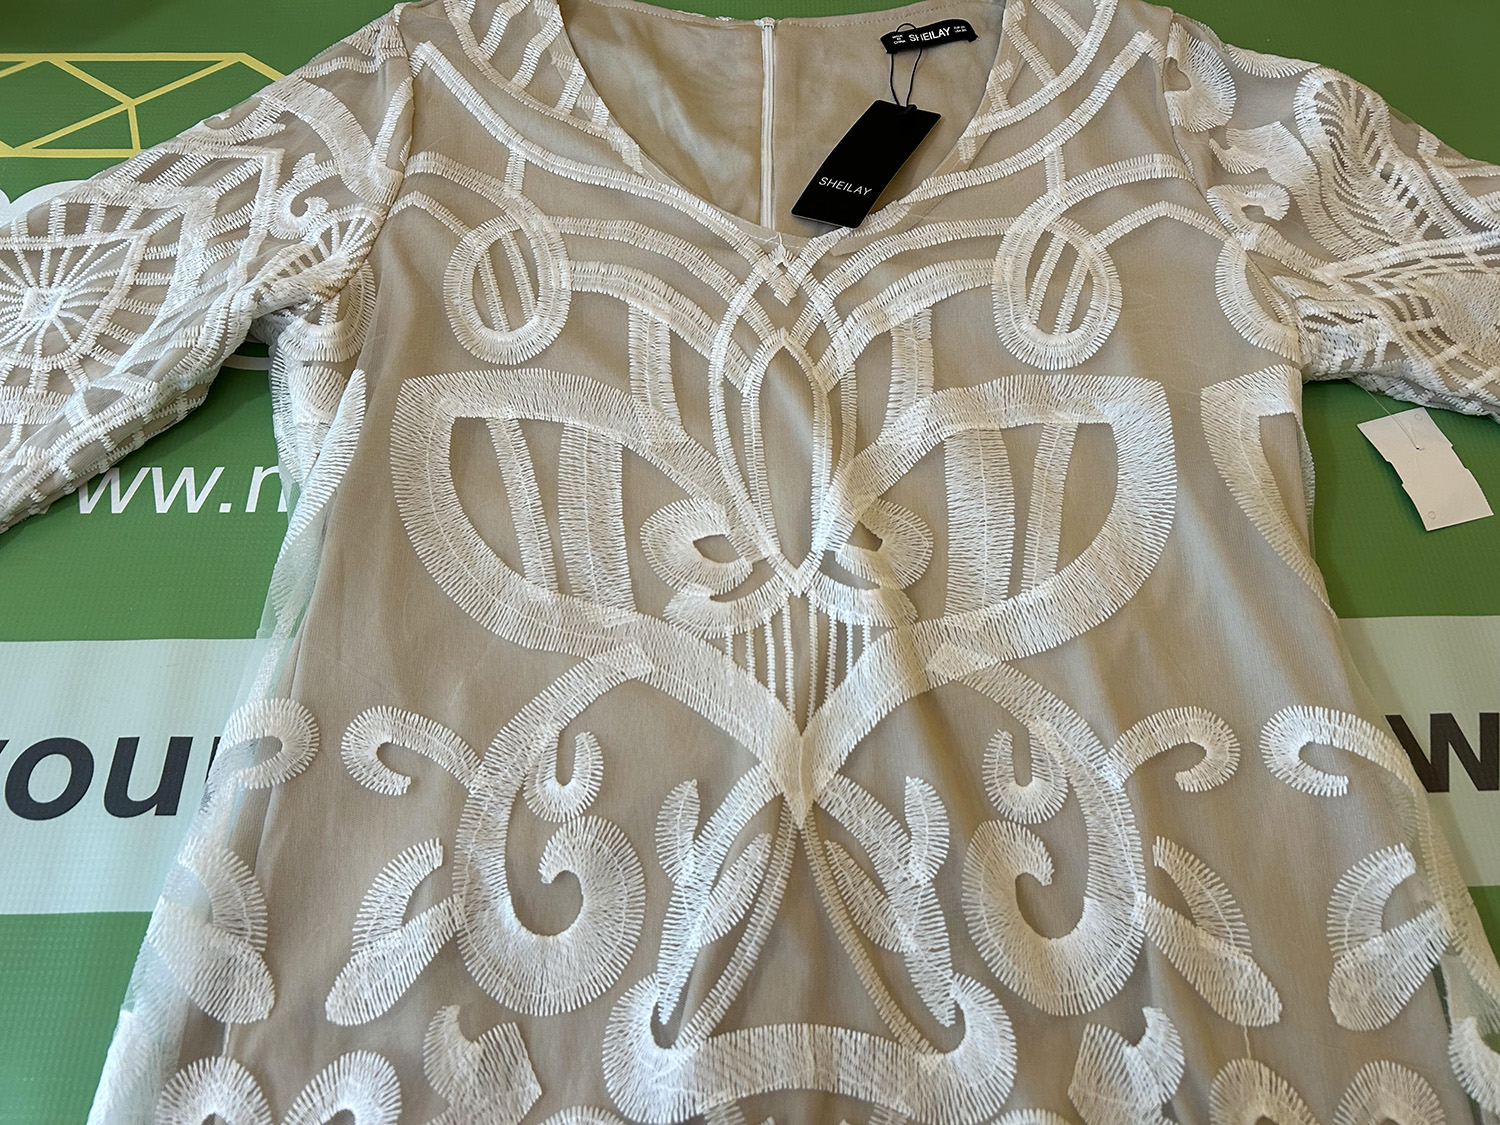 Sheilay Womens White Embroidered Long Sleeve Party Dress Size 3XL